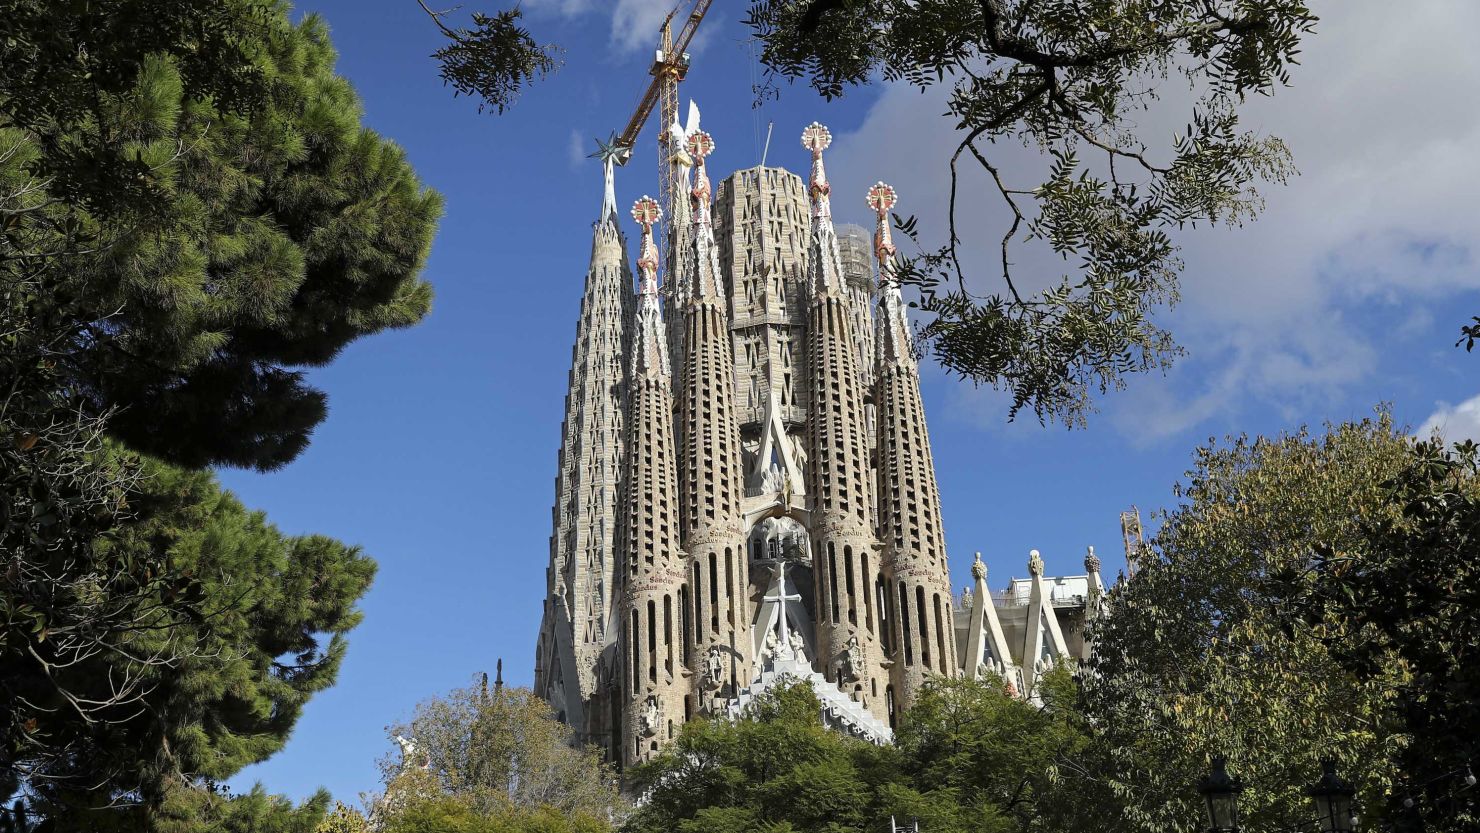 Construction began on the Sagrada Familia cathedral in 1882.